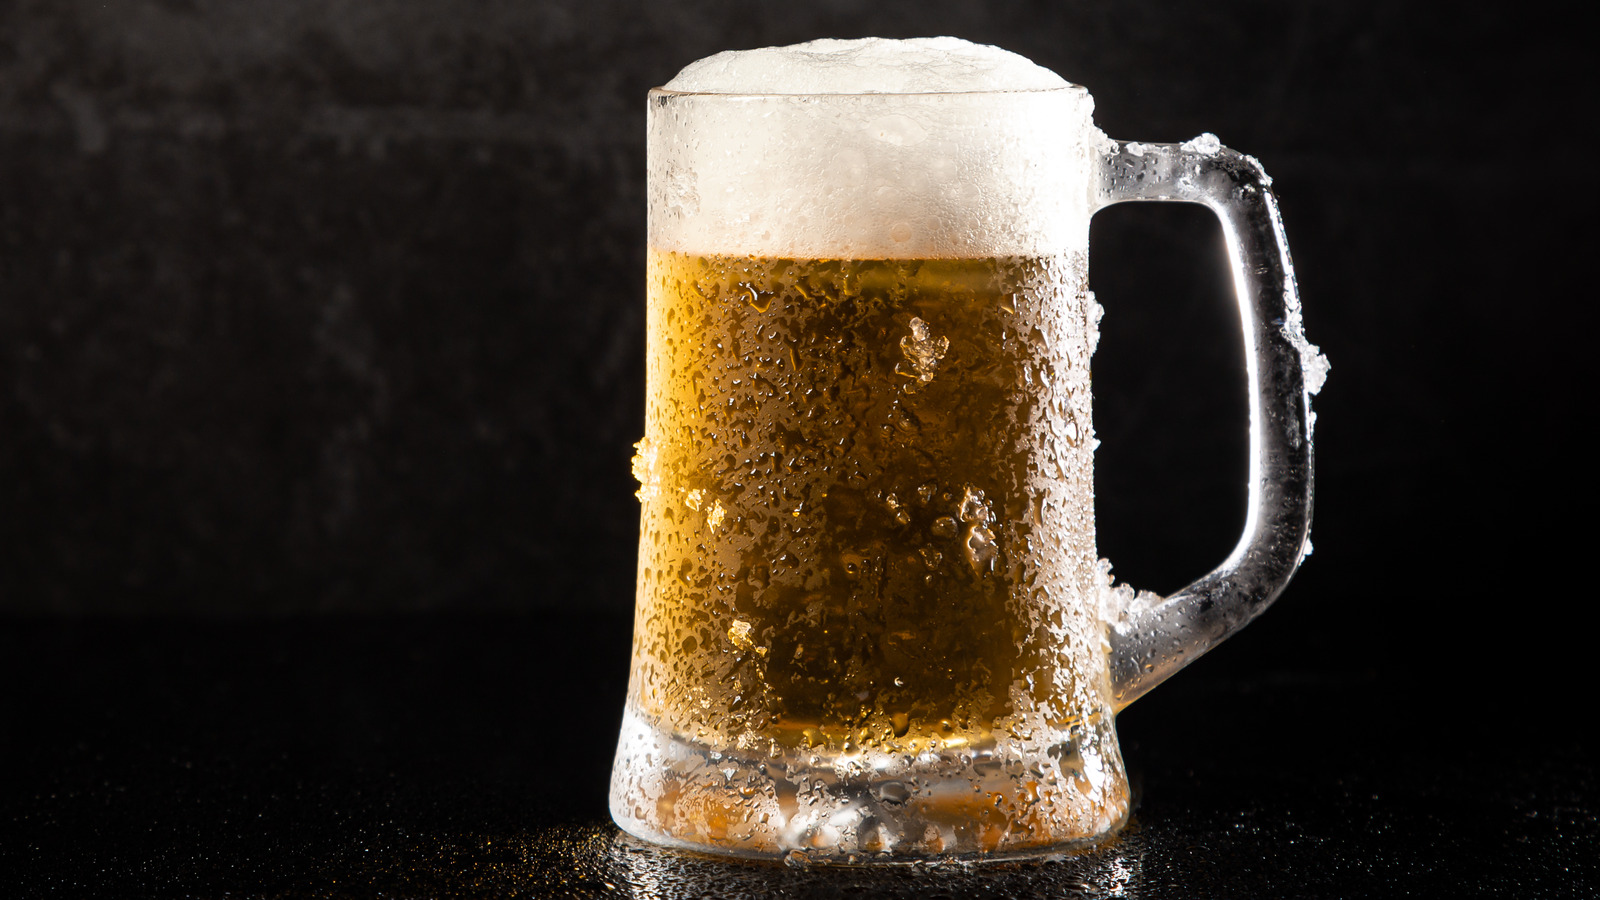 https://www.thedailymeal.com/img/gallery/the-reason-beer-is-commonly-served-in-an-ice-cold-glass/l-intro-1696439700.jpg